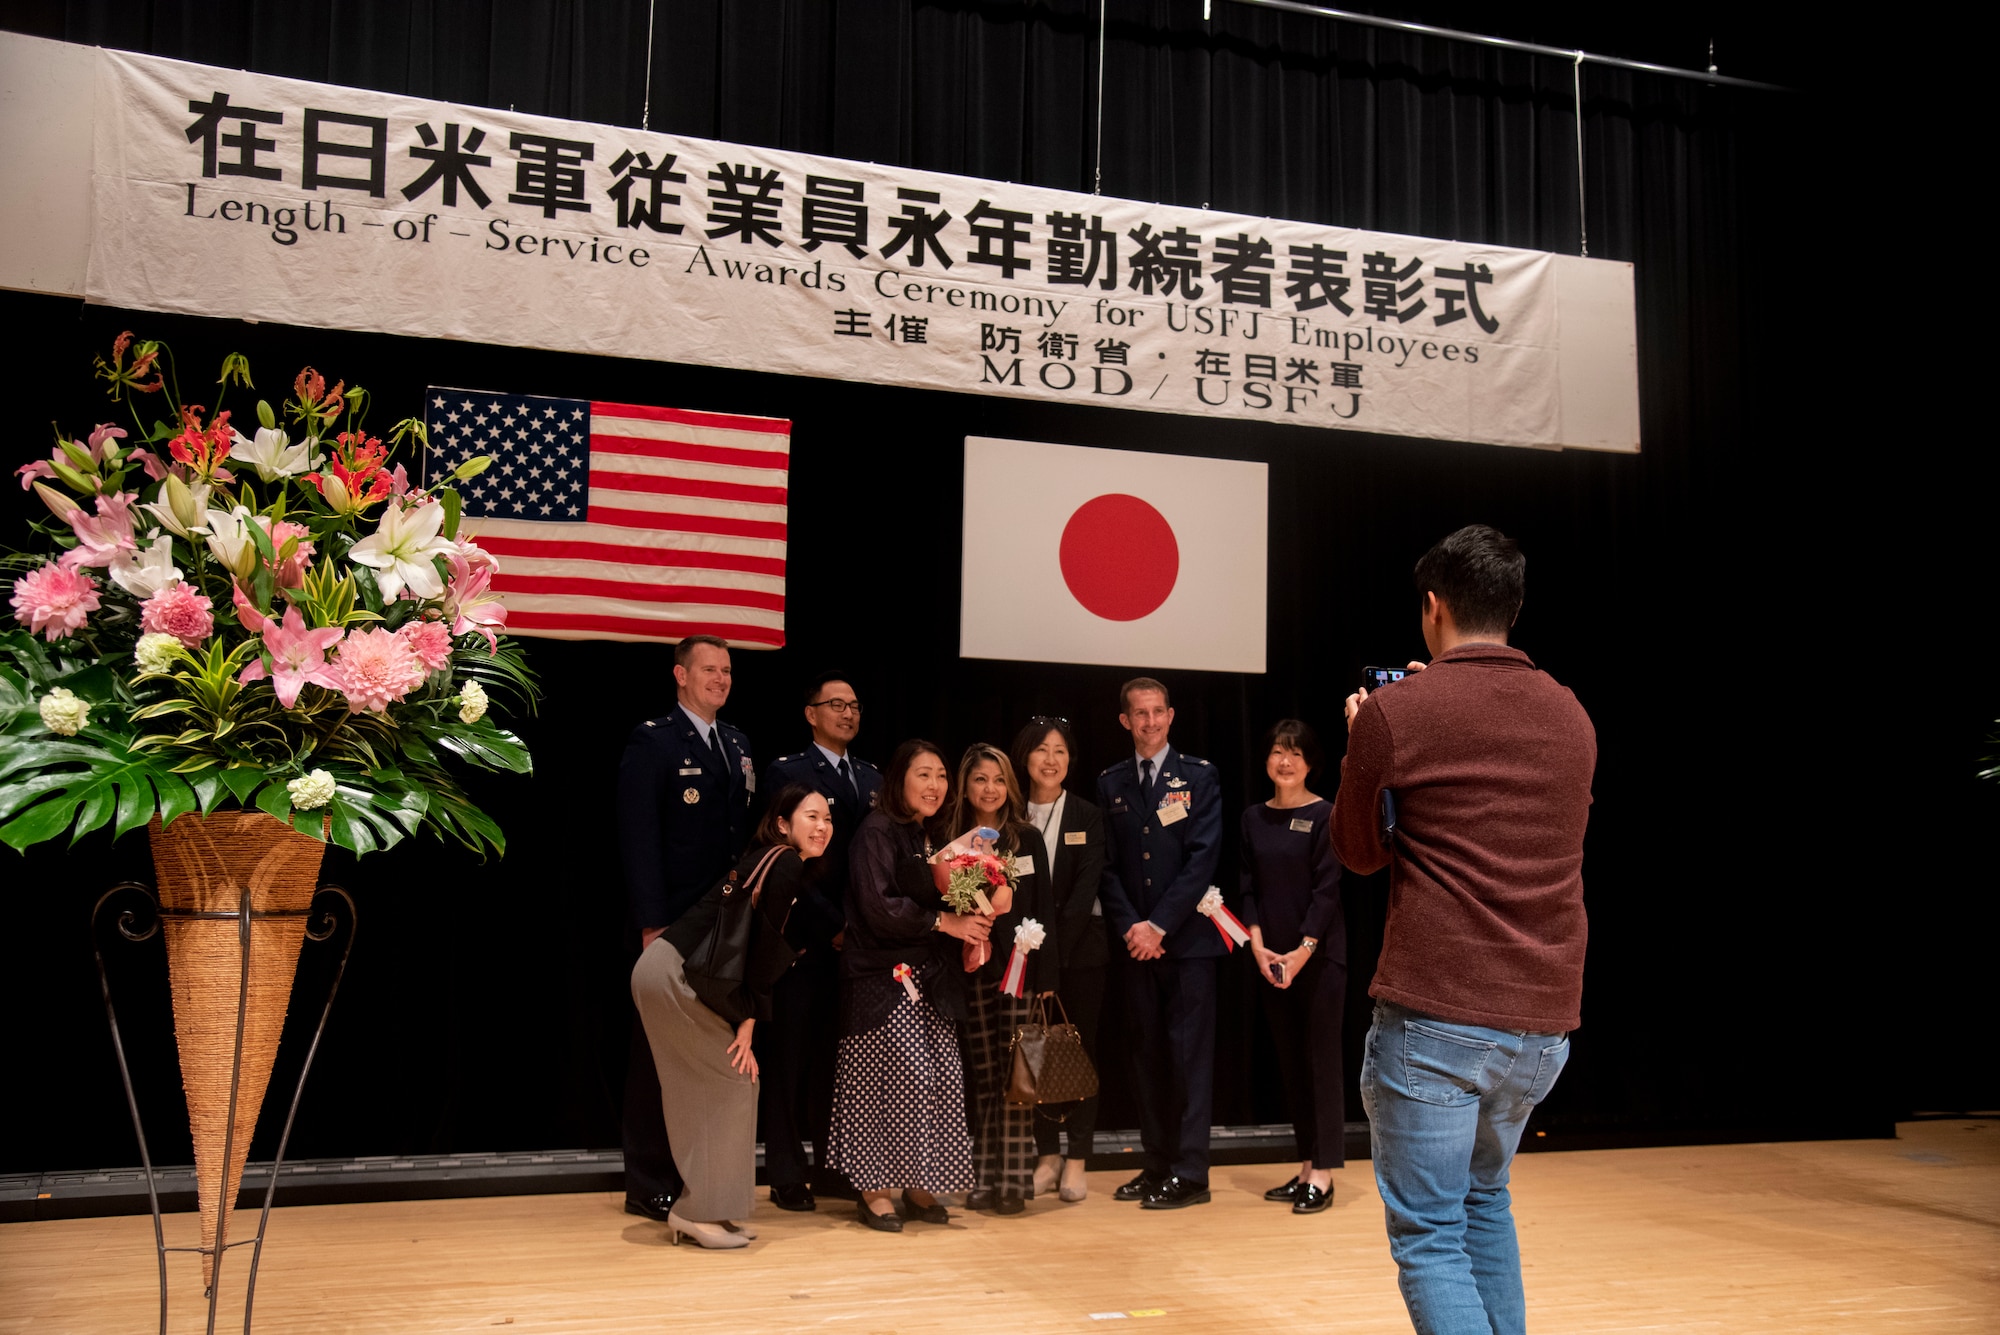 U.S. Air Force Col. Michael Richard, 35th Fighter Wing commander, stands with a recipient and their coworkers during a Length of Service Award Ceremony at Misawa City, Japan, Oct. 20, 2023.